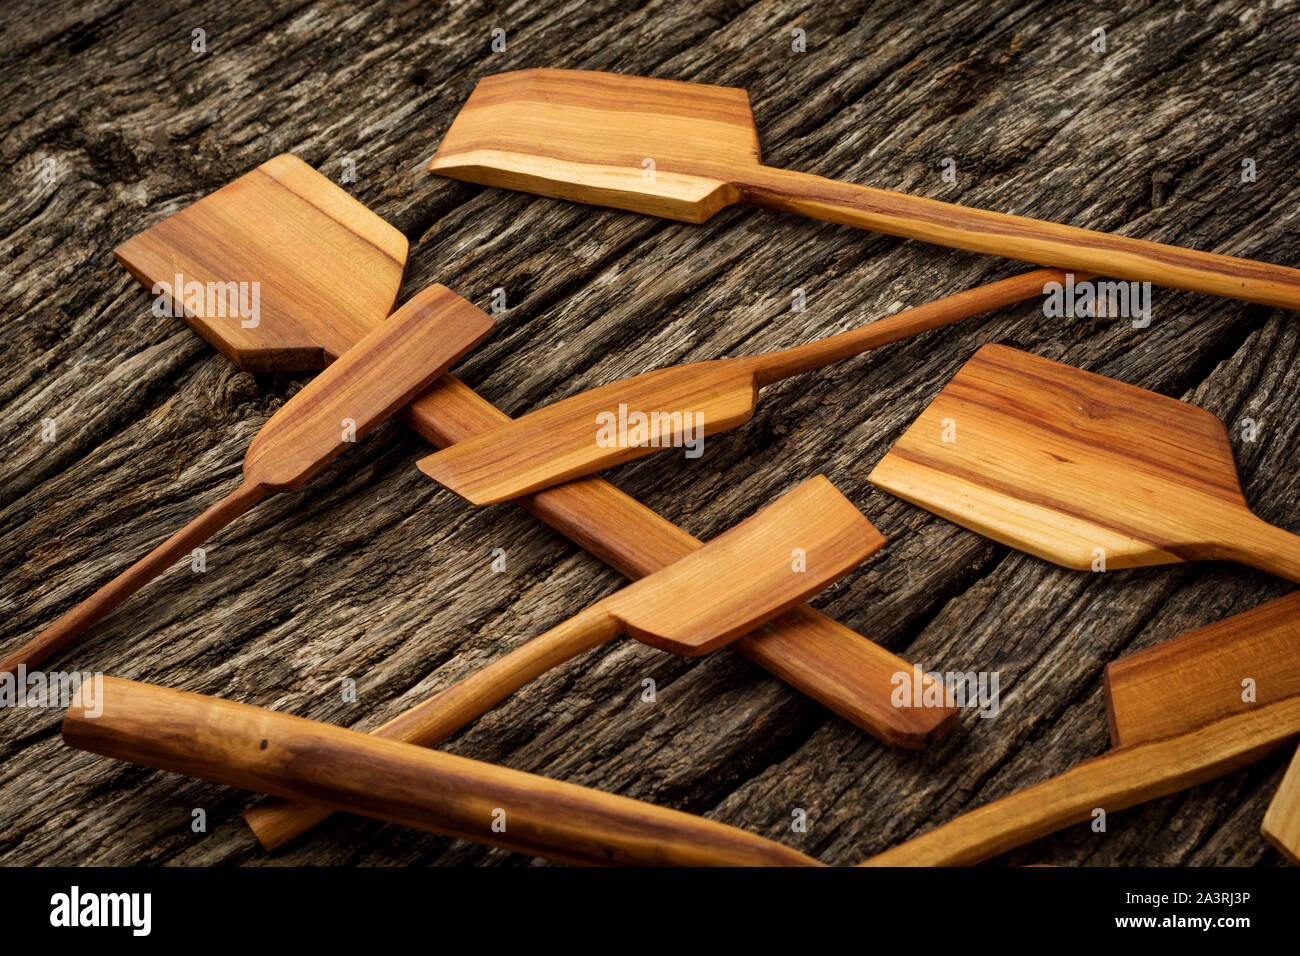 Wooden kitchen utensils on rustic background close-up. Flat lay. Stock Photo